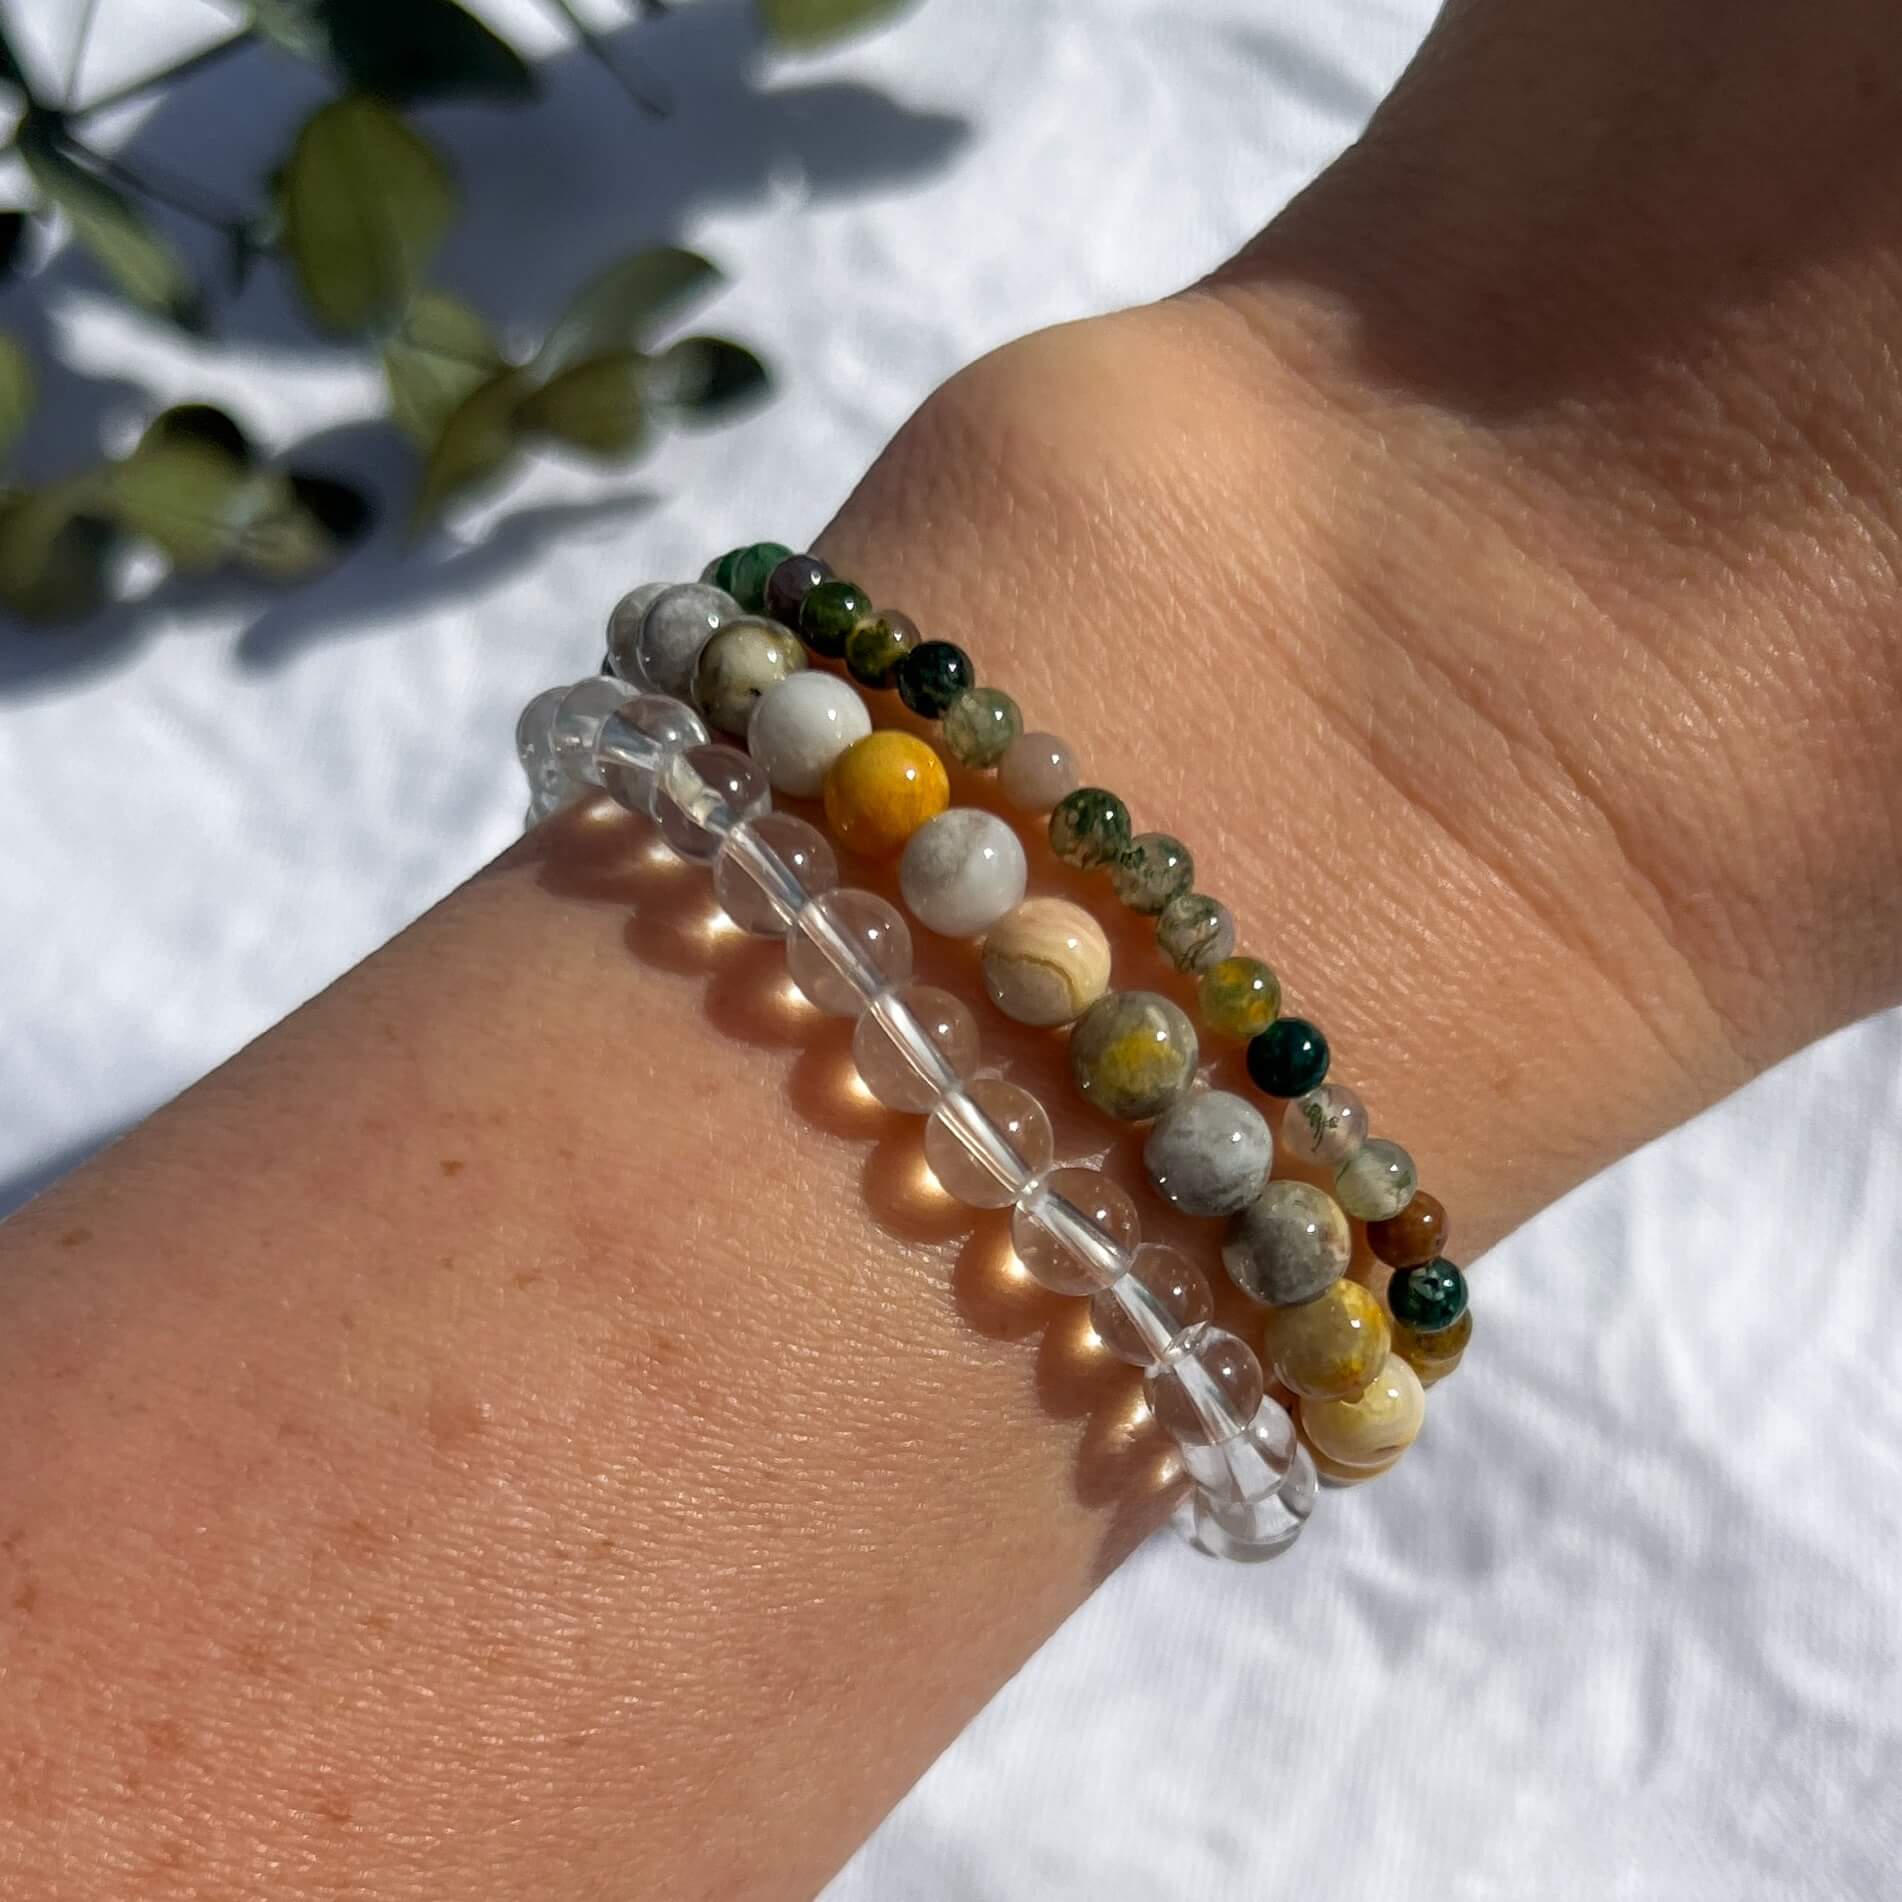 Pure Joy healing crystal bead bracelets rock and realm crystals